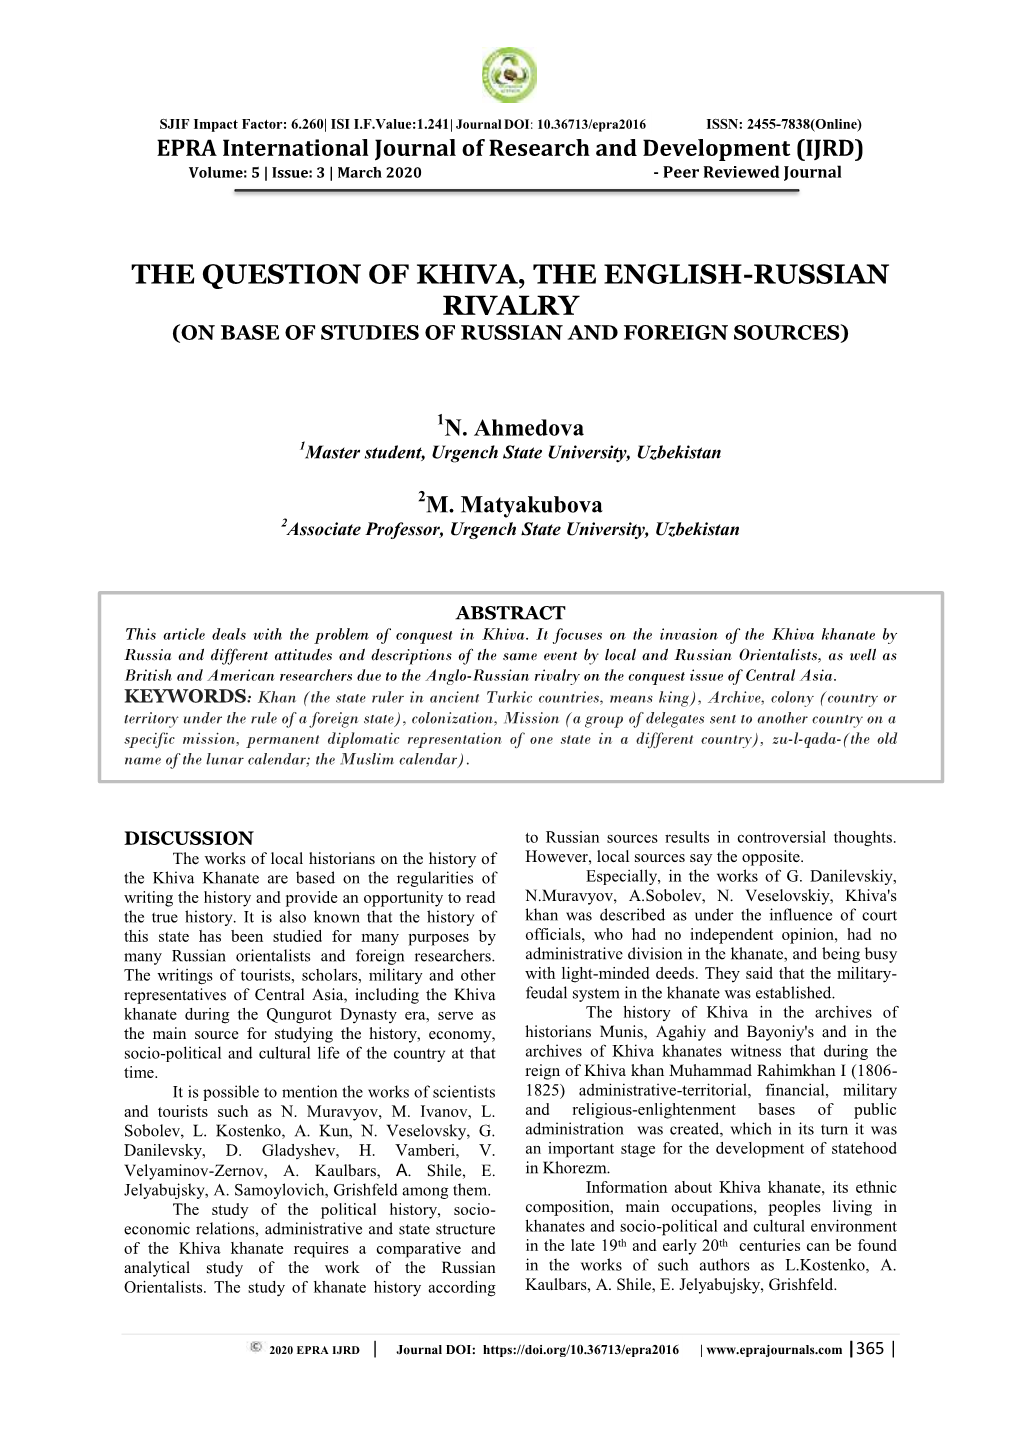 The Question of Khiva, the English-Russian Rivalry (On Base of Studies of Russian and Foreign Sources)